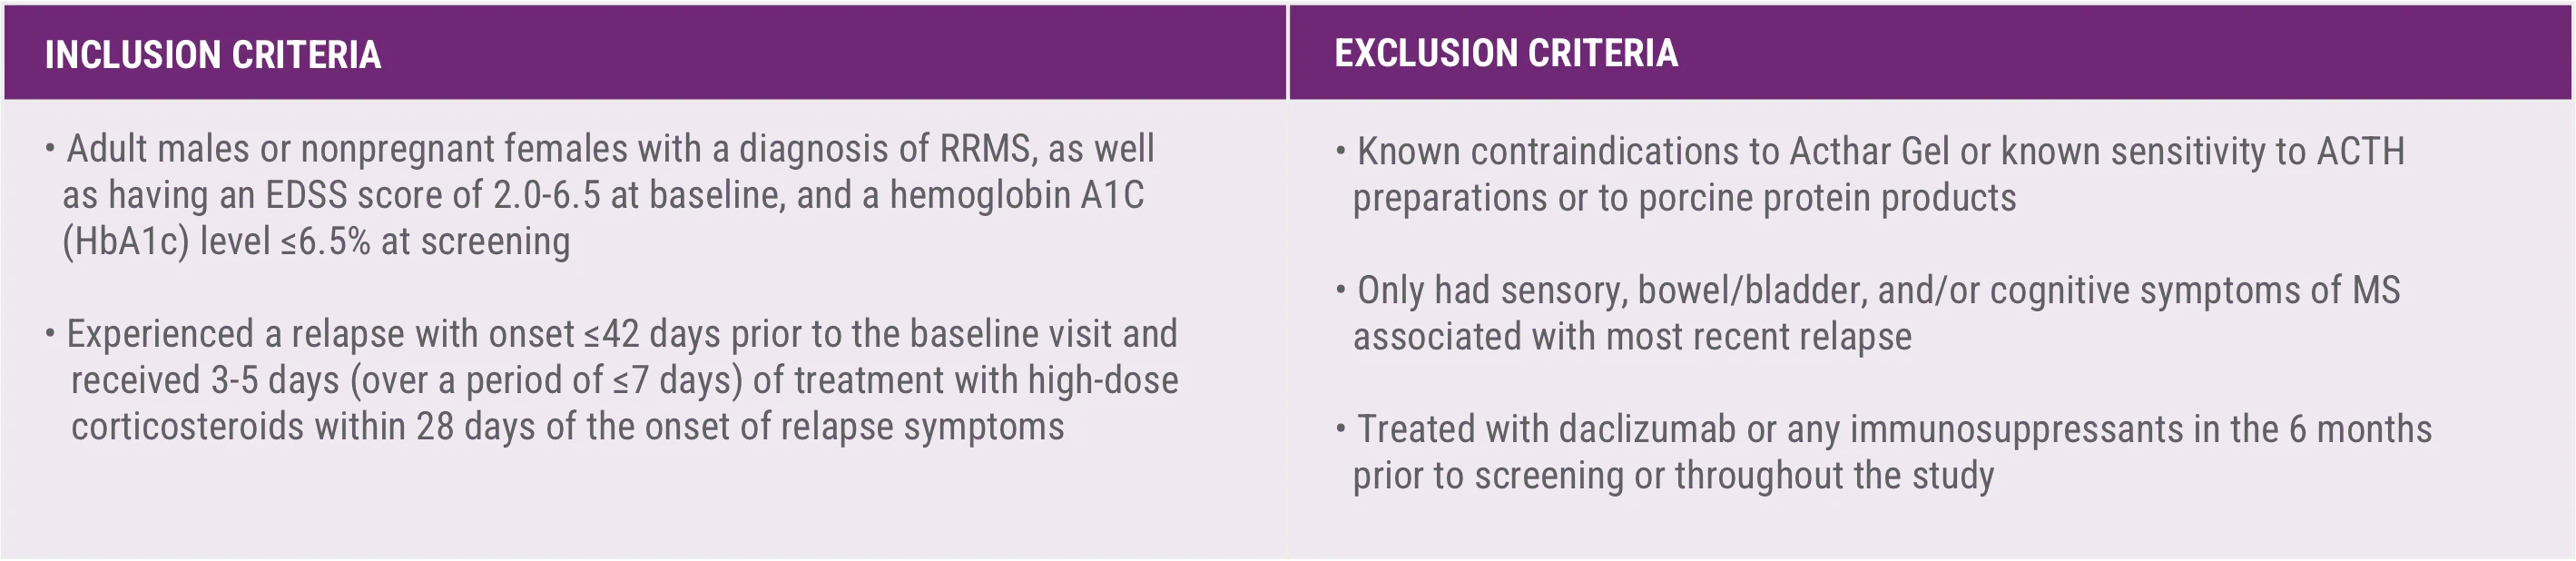 Acthar Gel multiple sclerosis relapse study design: inclusion and exclusion criteria